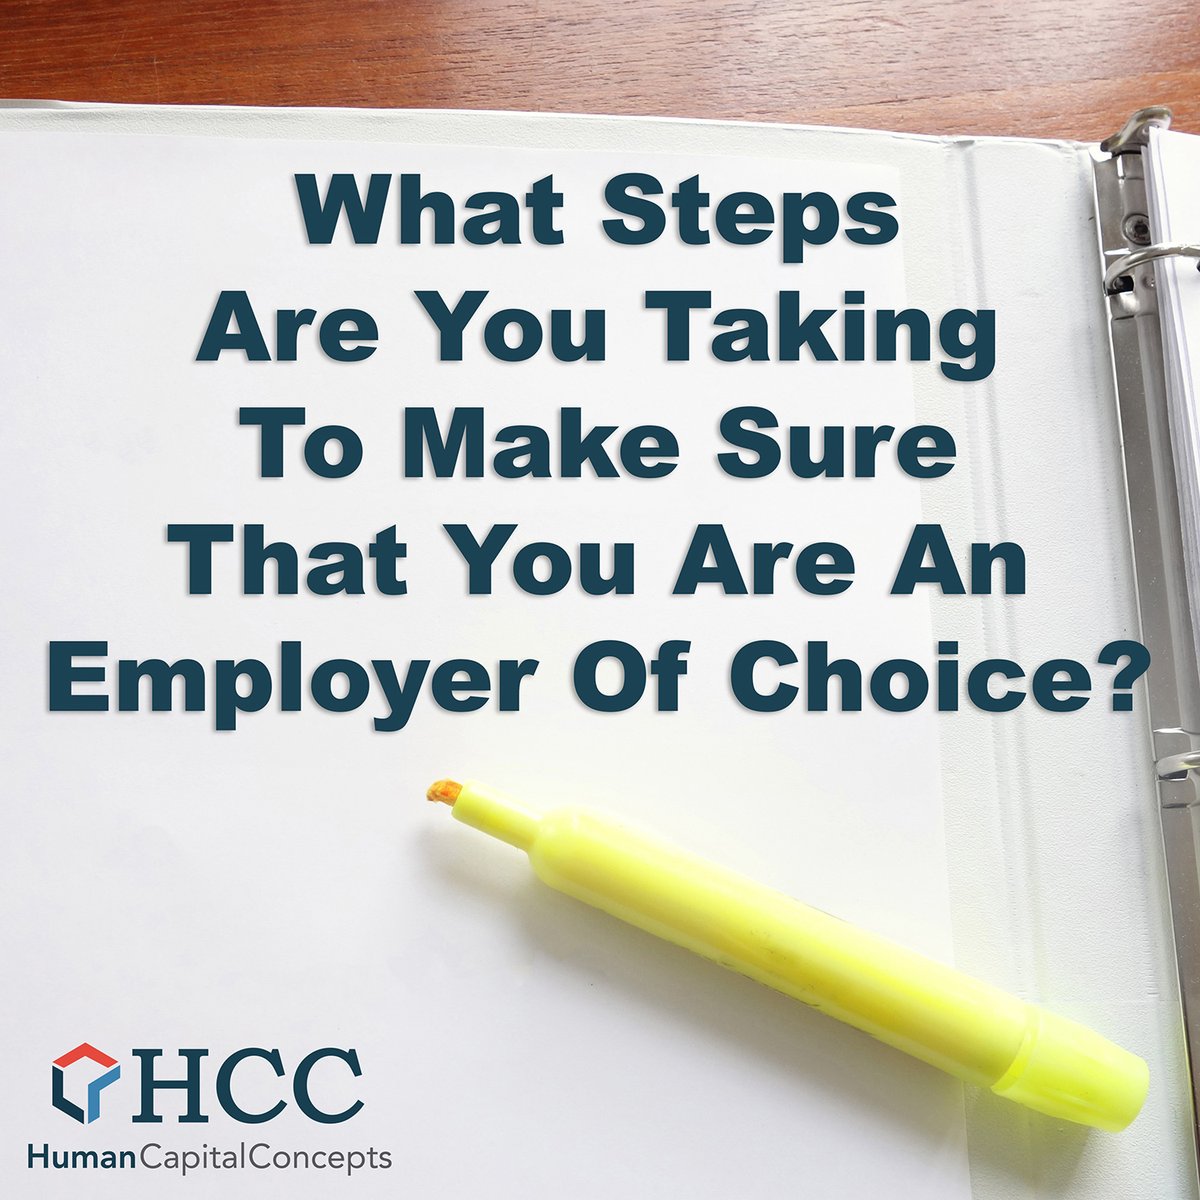 Many employers are increasingly concerned with sustaining a high-quality workforce. What steps are you taking to ensure you are an employer of choice? #PEO #HCC #HRSolutions #HRManagement #HRConsulting #EmployeeCompensation #EmployeeBenefits drive.google.com/file/d/1AI_q5l…